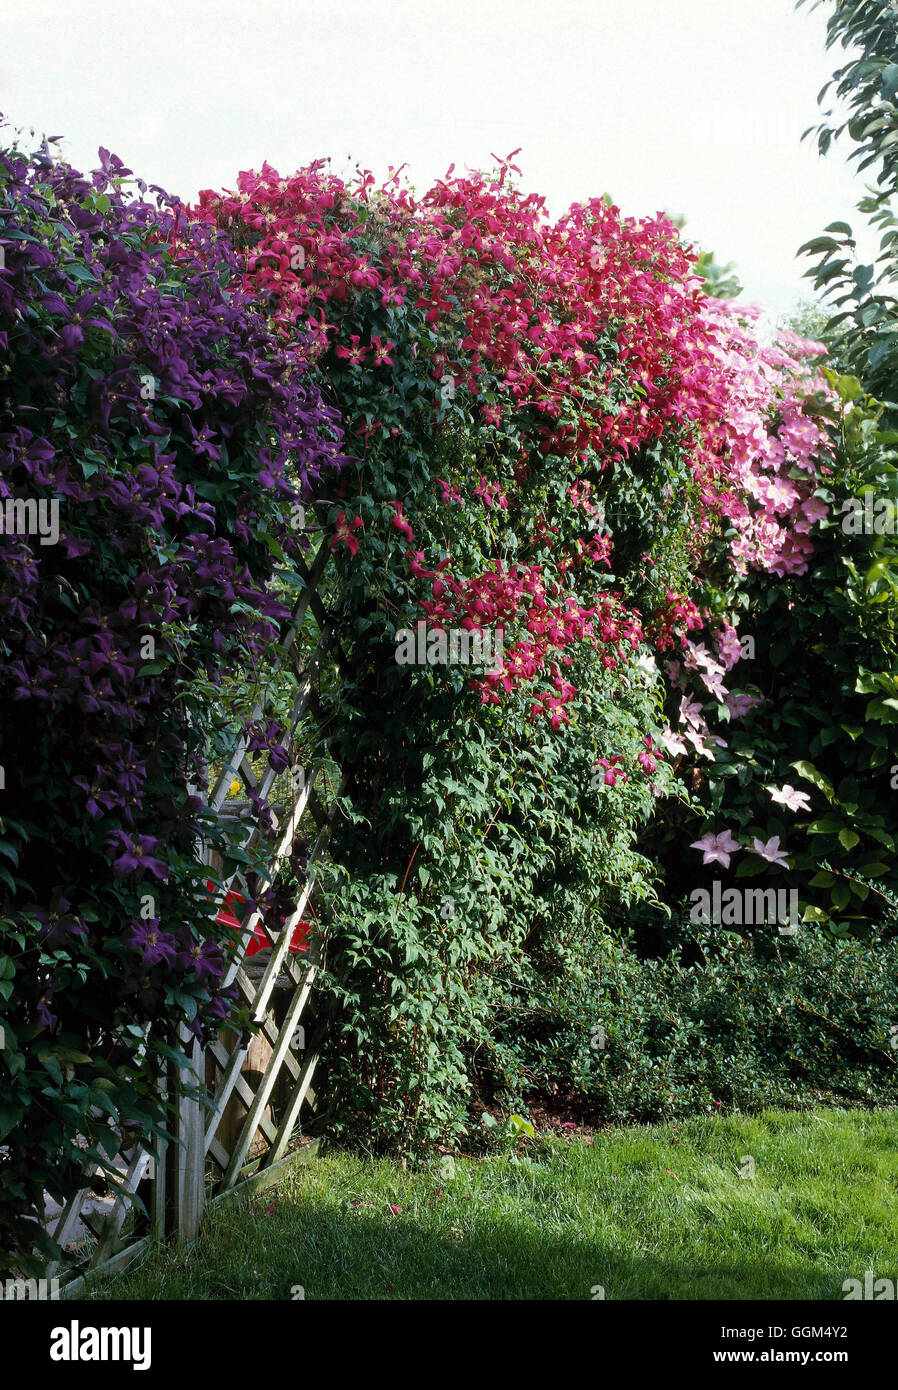 Screening - with fence and Clematis - (Please credit: Photos Horticultural/ S. Marczynski  Poland)   SNG090143  Compul Stock Photo